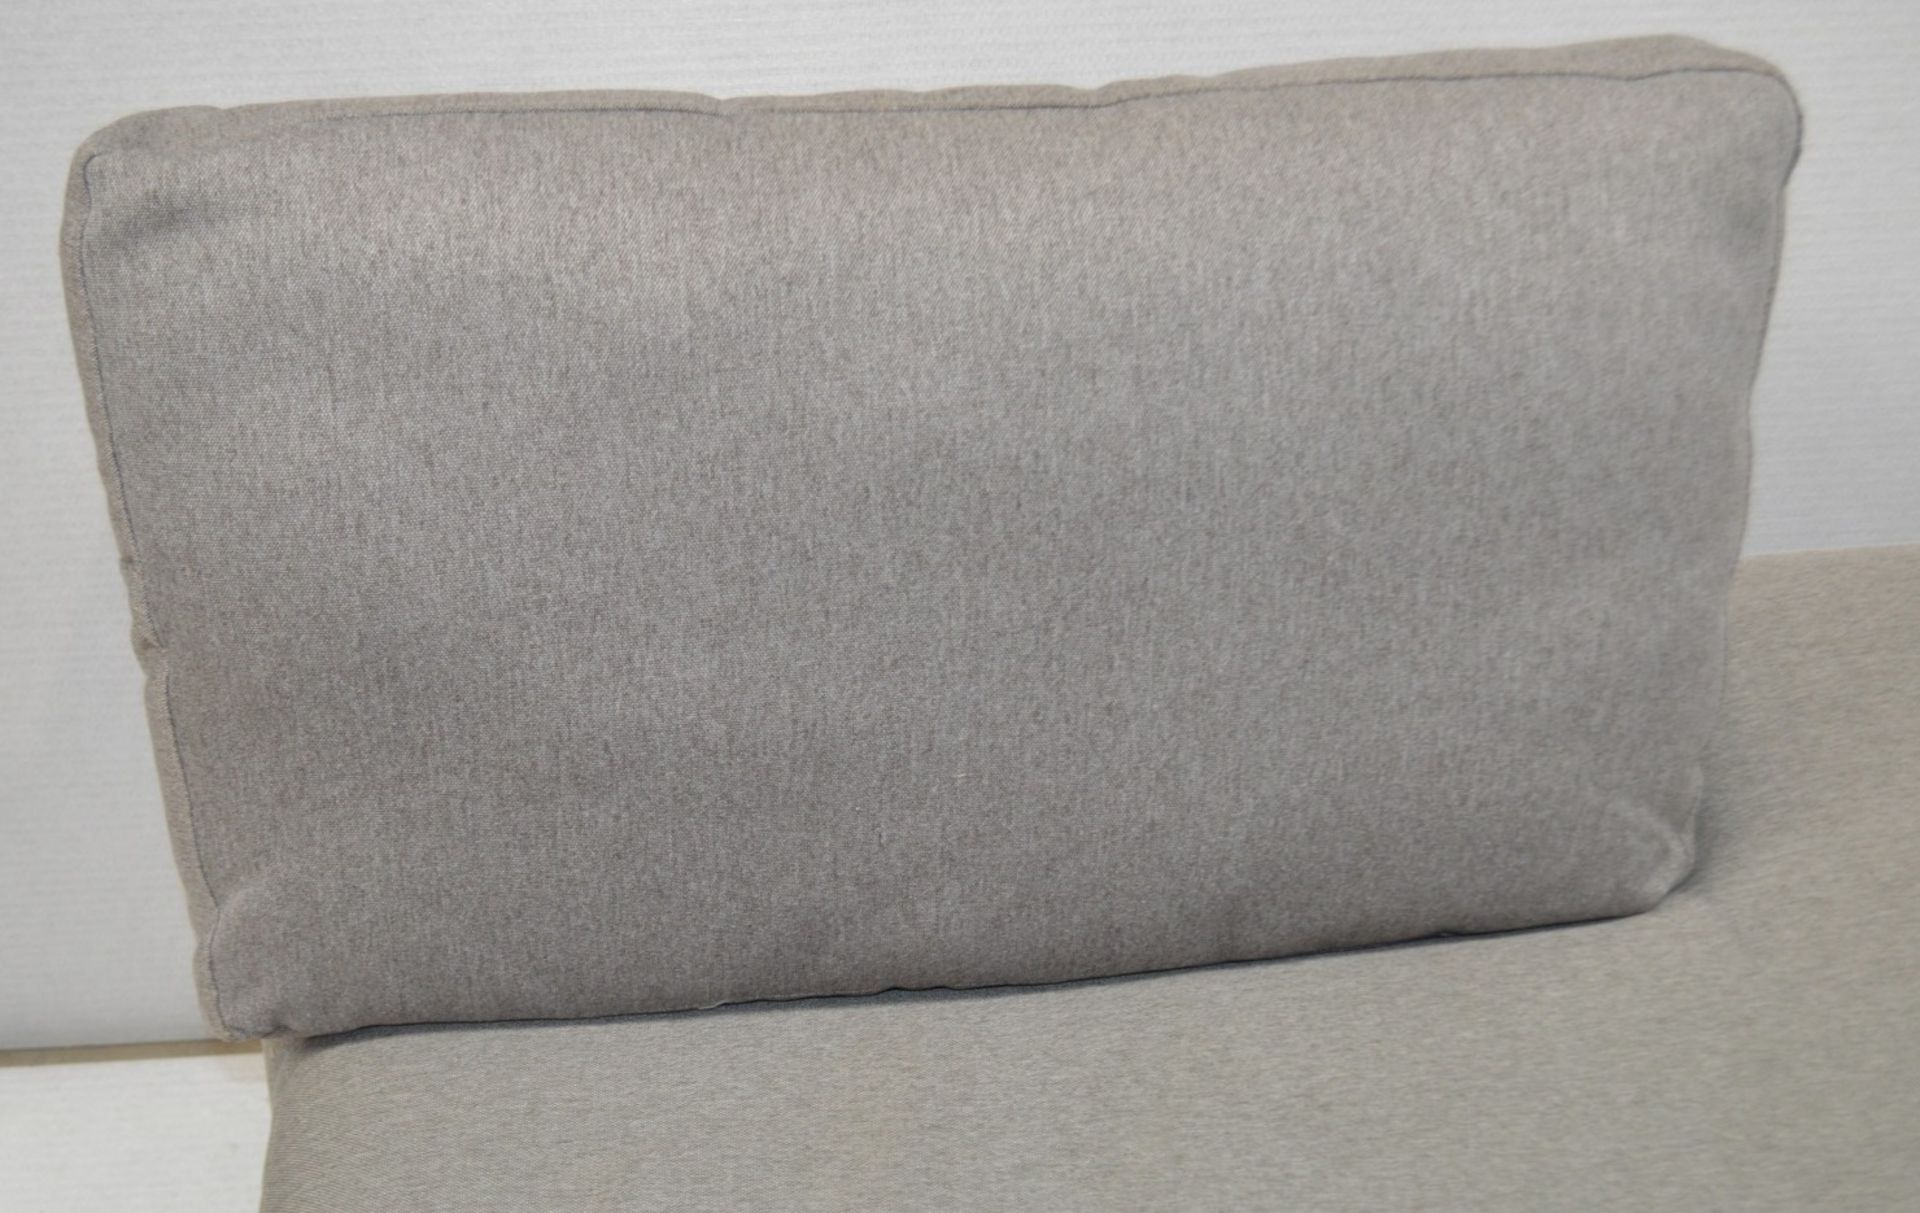 1 x Modular Chaise Lounge Upholstered In A Light Grey Fabric - Dimensions: D90 x L160 x H66cm / Seat - Image 4 of 8